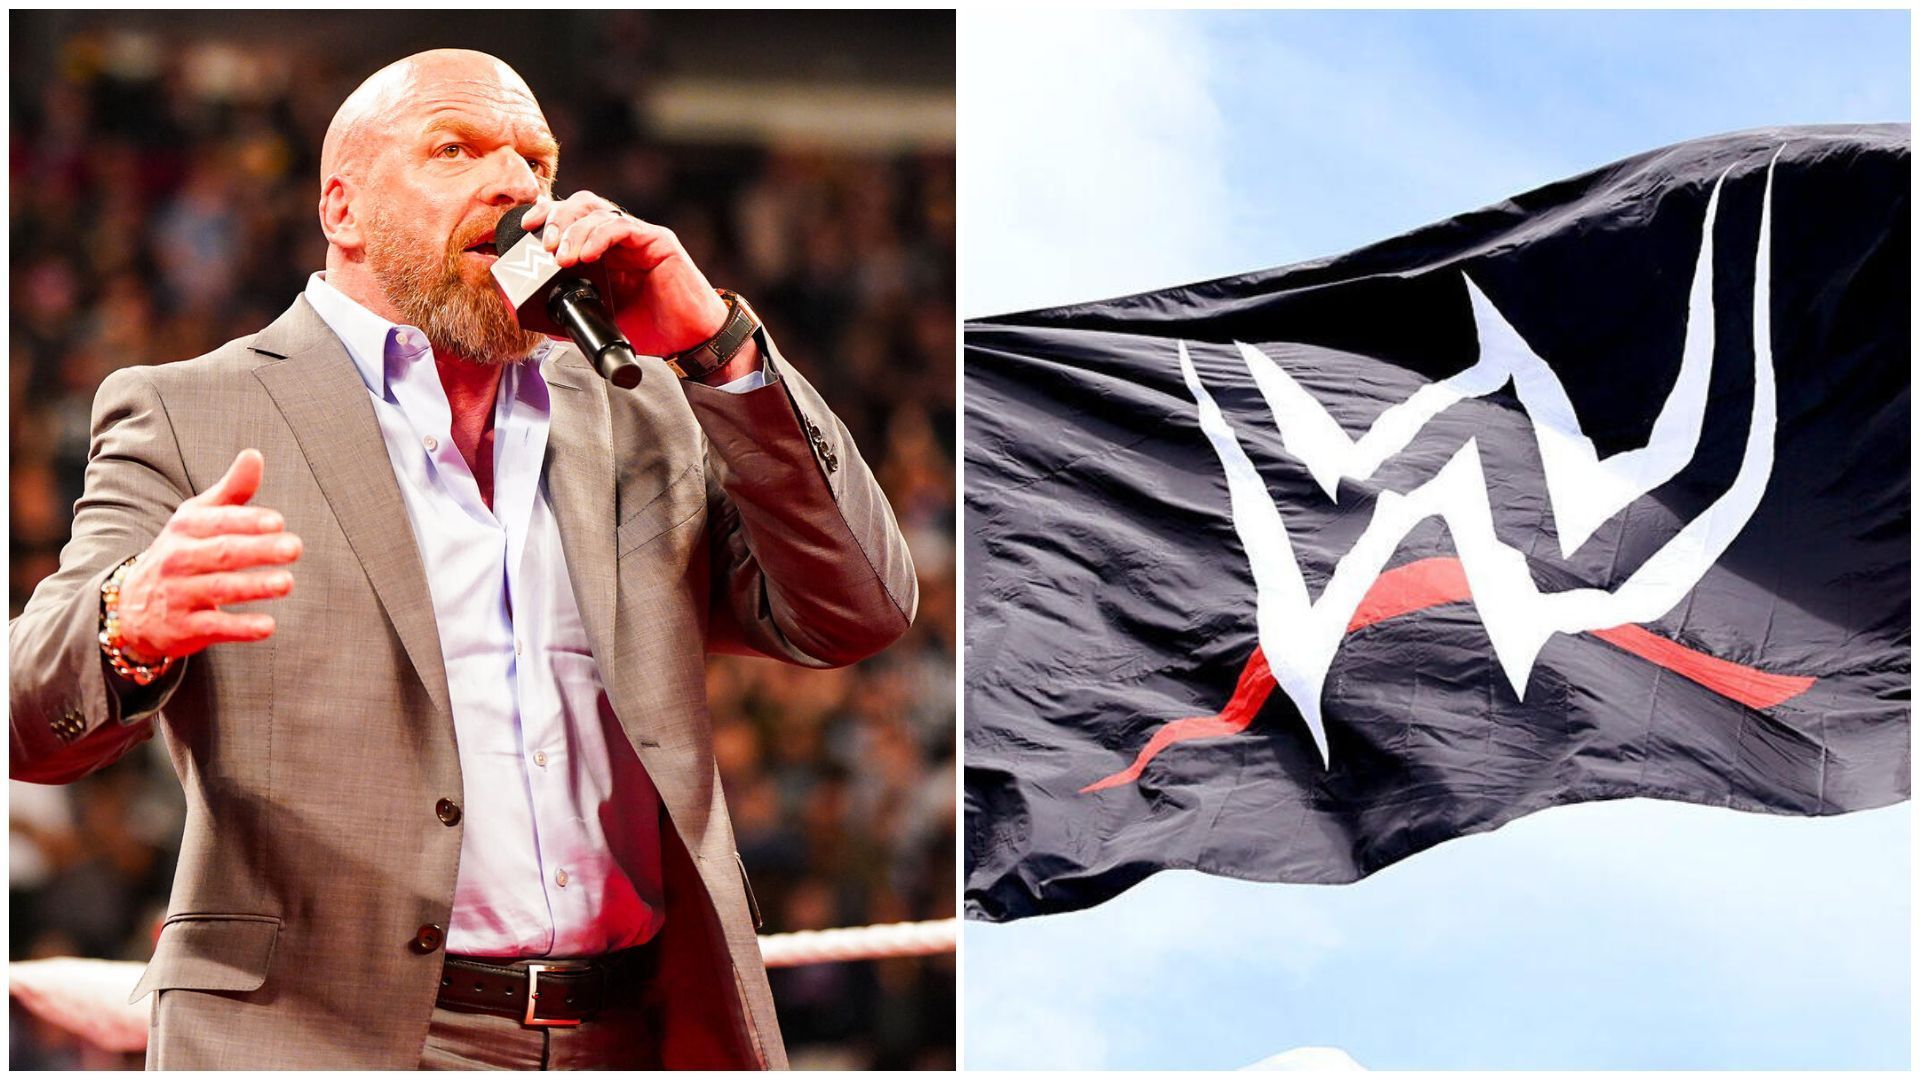 WWE is leading into new era under Triple H.